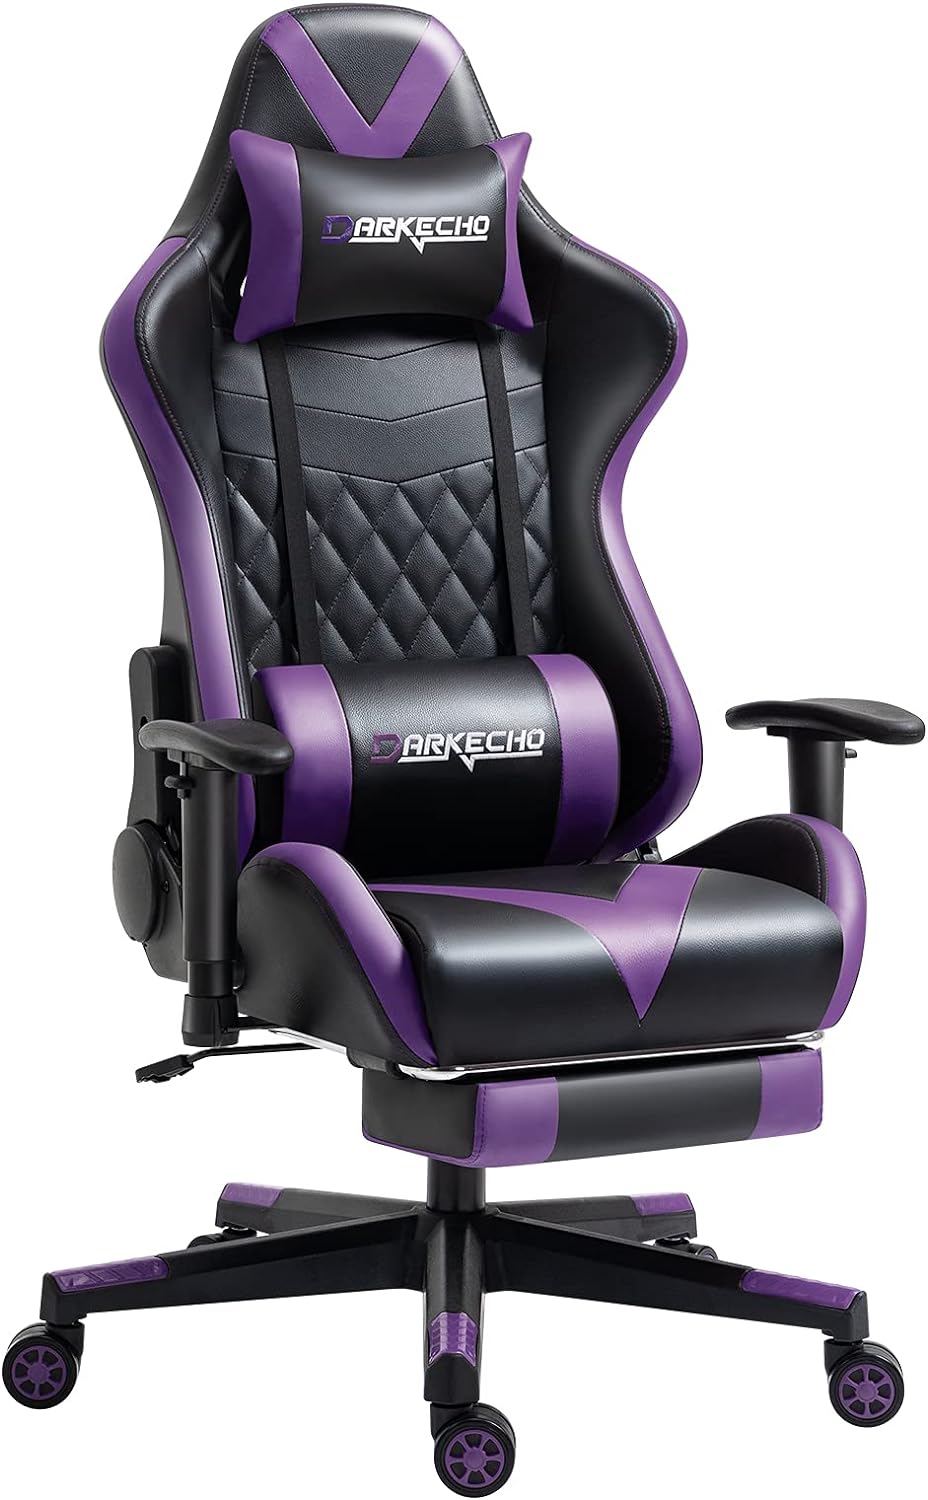 The Ultimate Guide to the Best Gaming Chairs: Top 5 Picks for Your Comfort